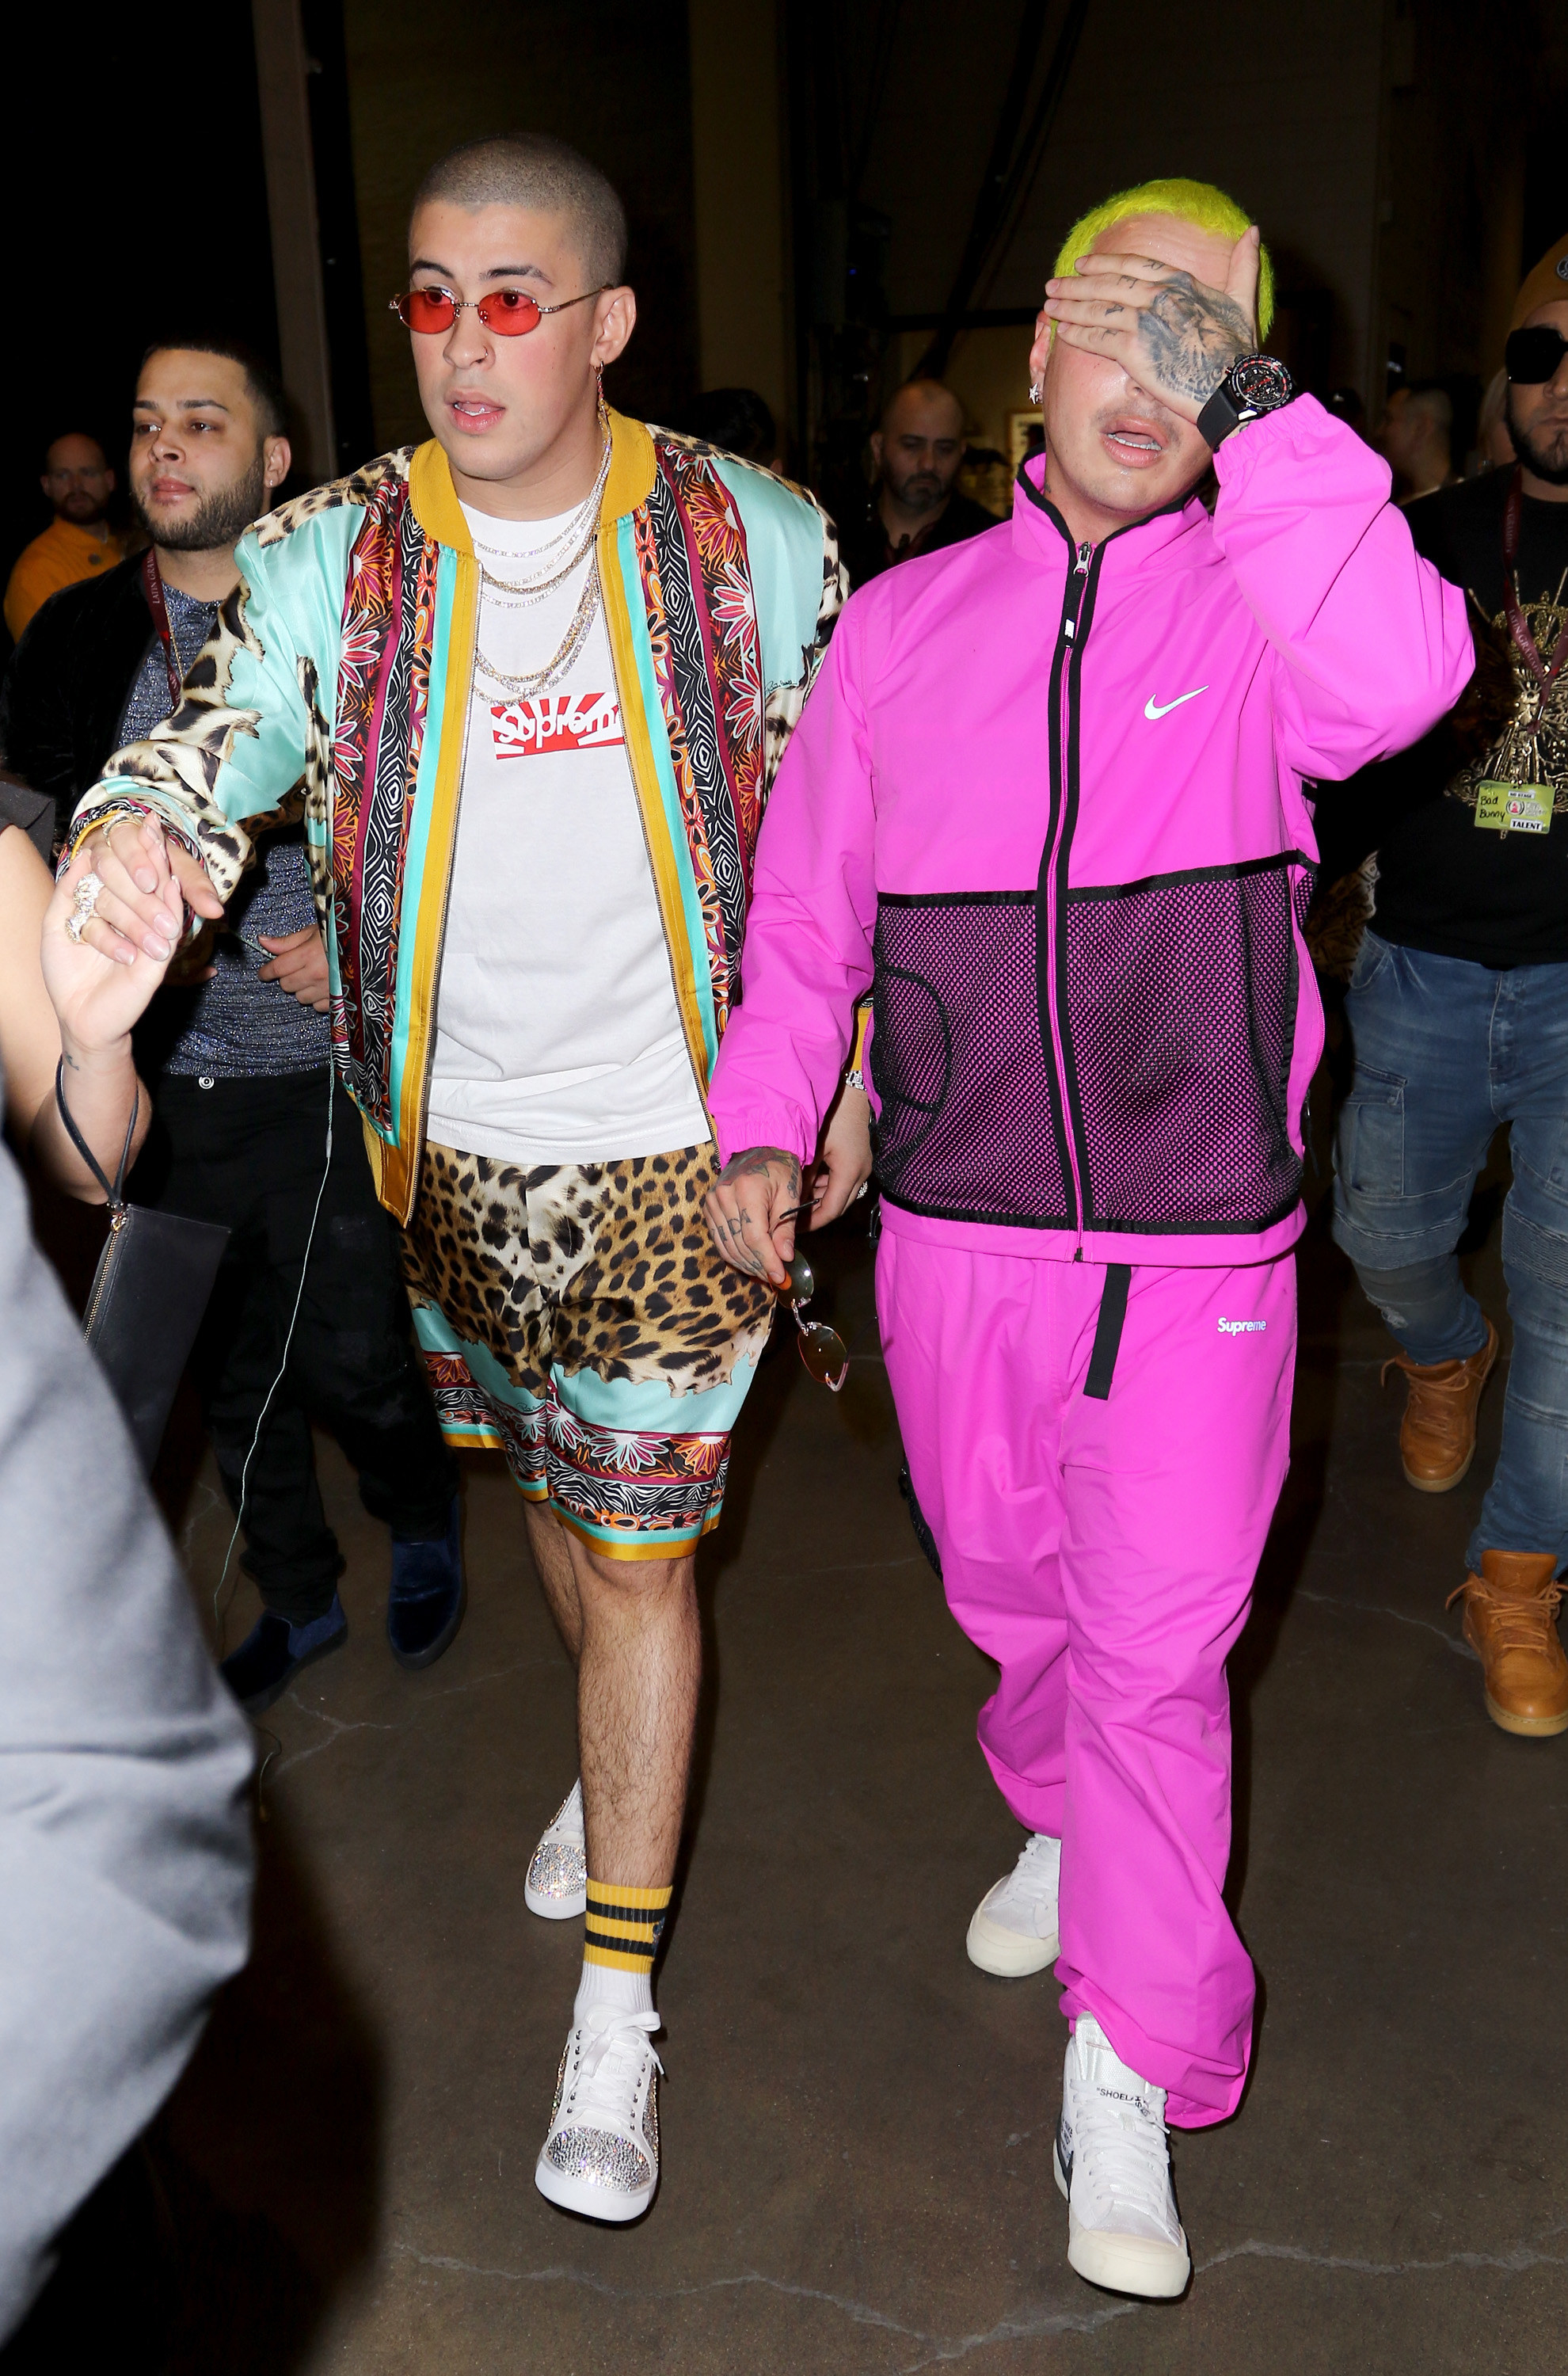 Bad Bunny with J Balvin at the Latin Grammy Music Awards in 2017